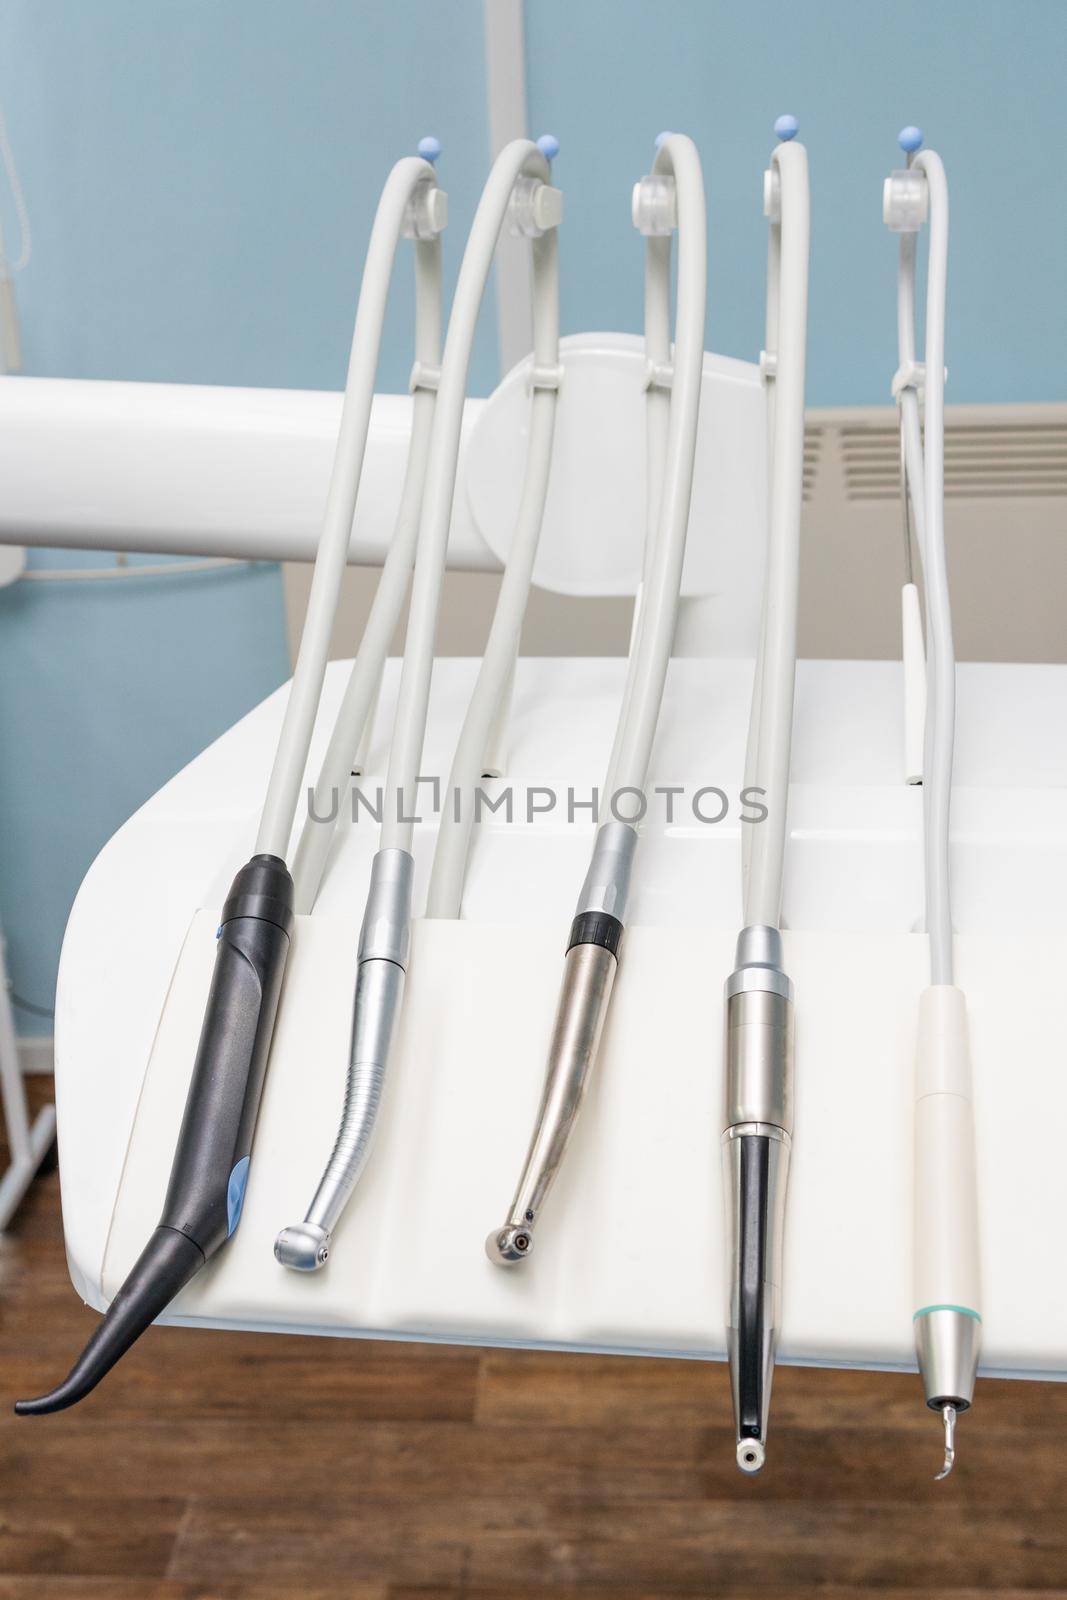 in the dental office, a mobile table with drills and other dental instruments that are part of the dental unit. treatment with disinfecting materials was carried out